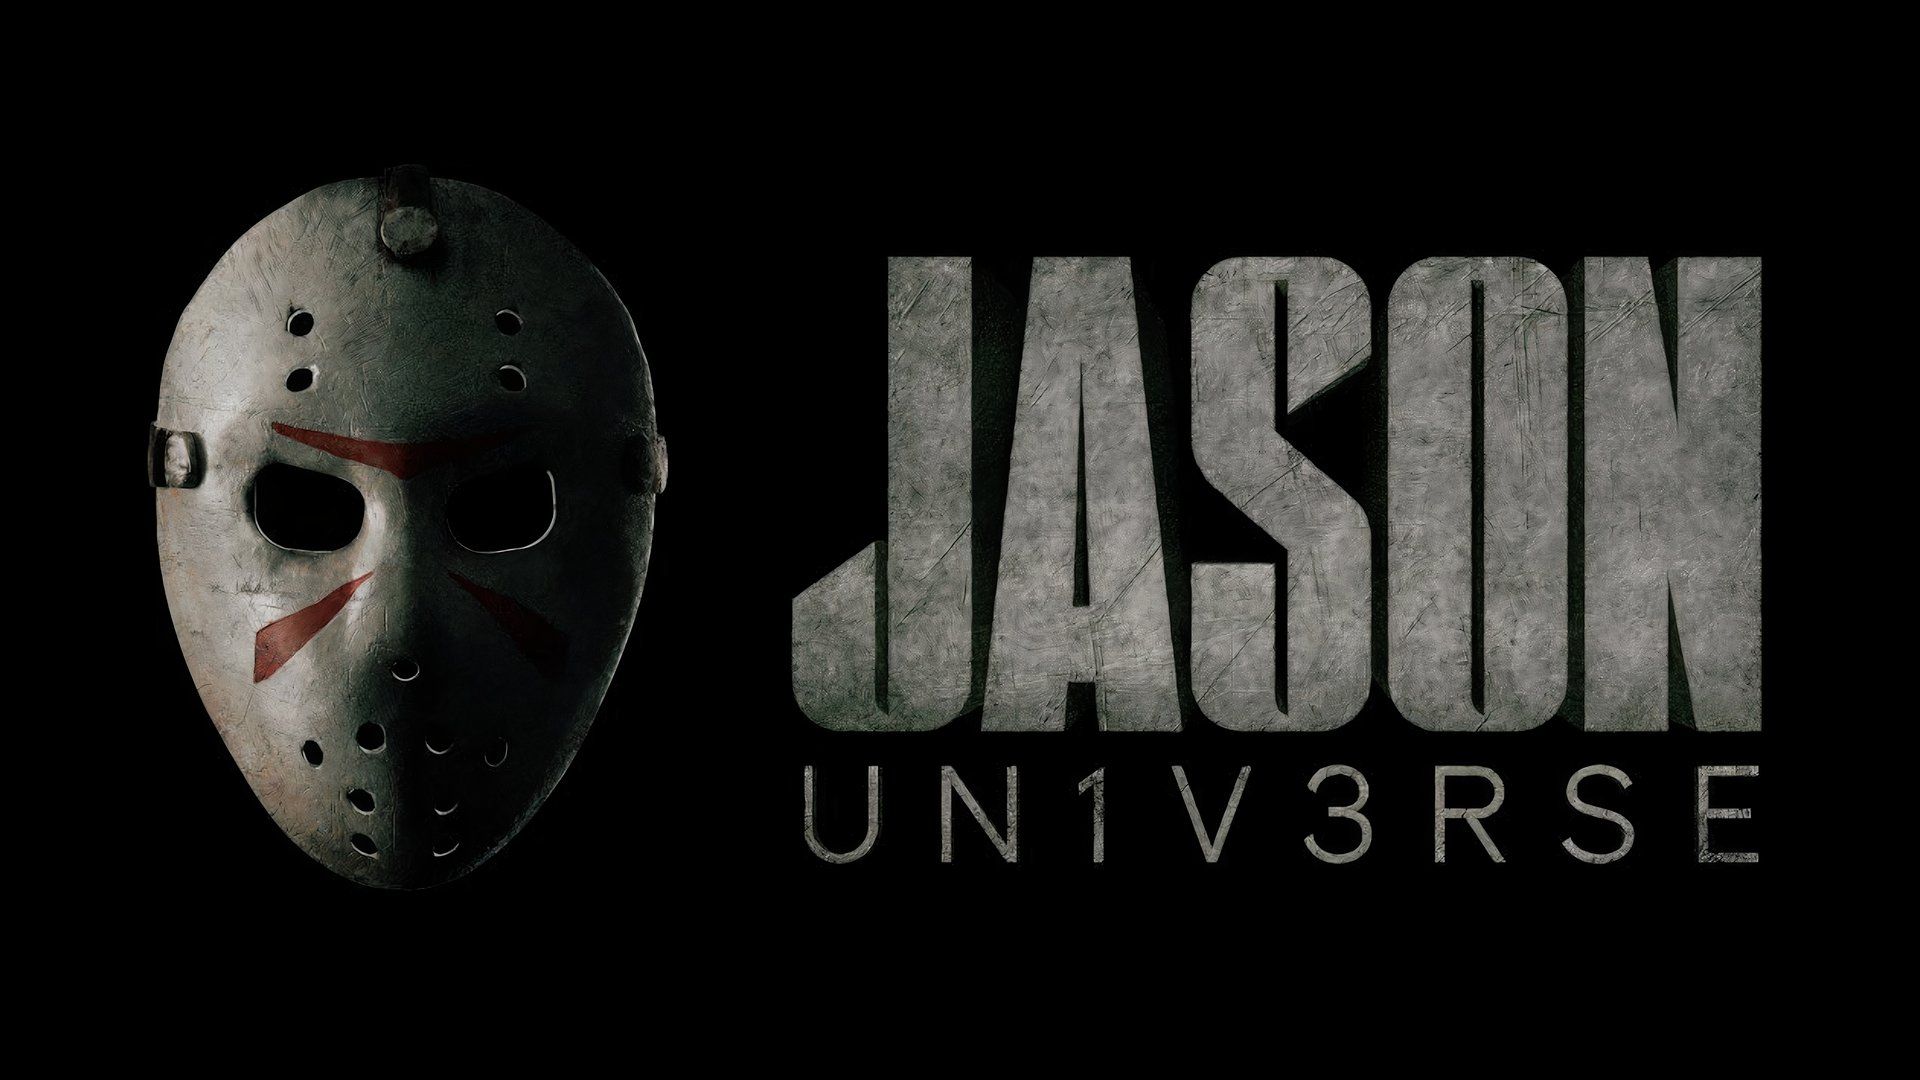 Friday the 13th Franchise Expanding Again With Horror, Inc. and the Multi-Platform Jason Universe